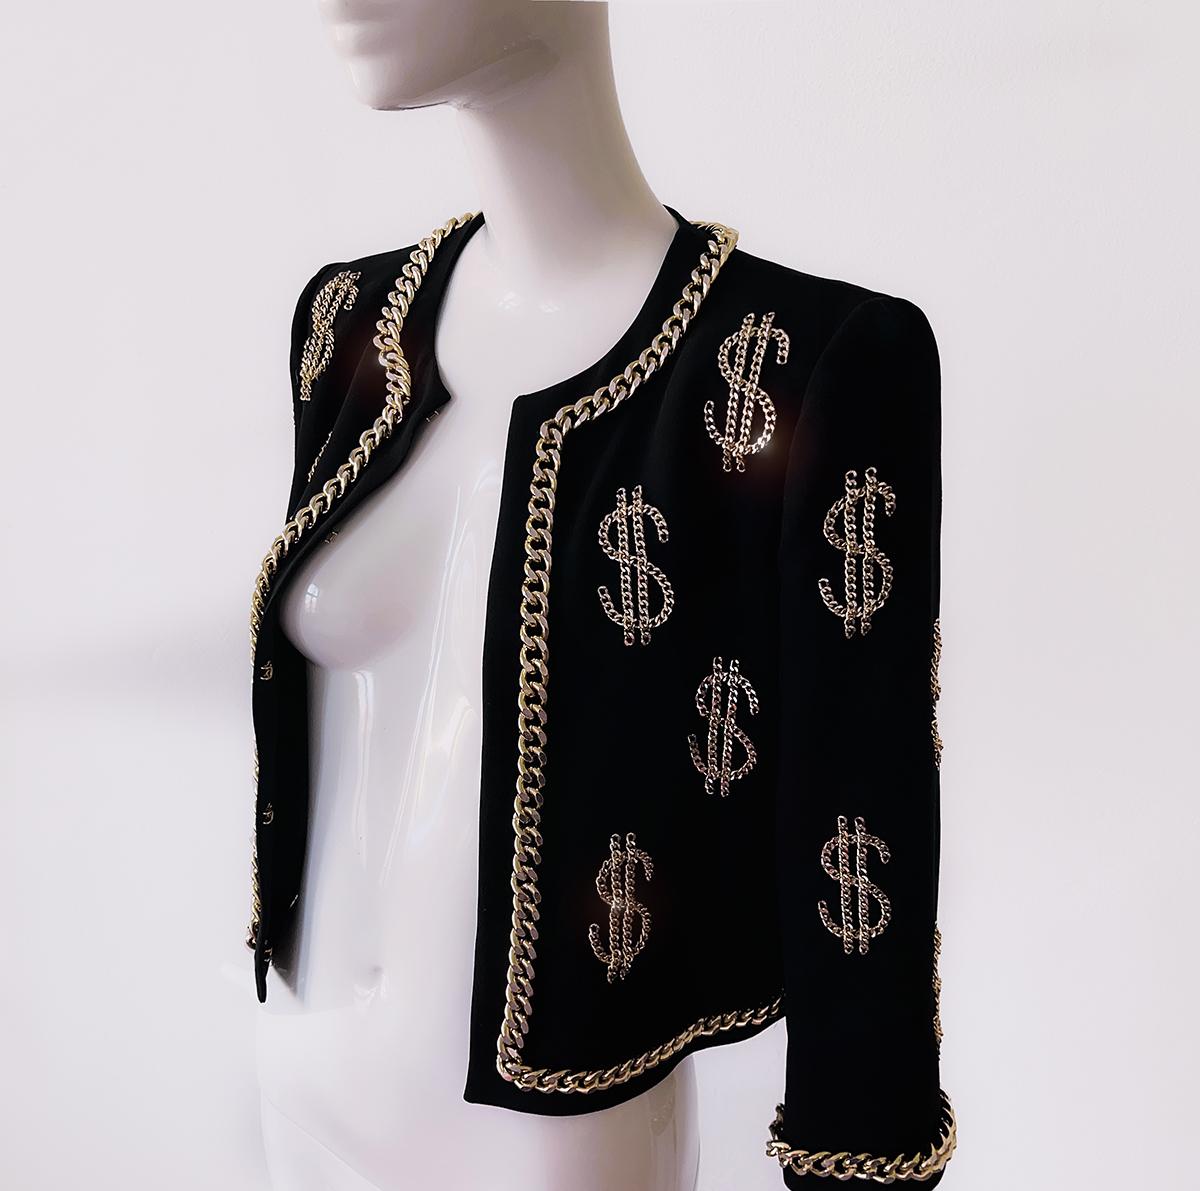 Iconique MOSCHINO Couture Dollar Sign Ensembe Black Dress Jacket Gold Chain Set  en vente 3